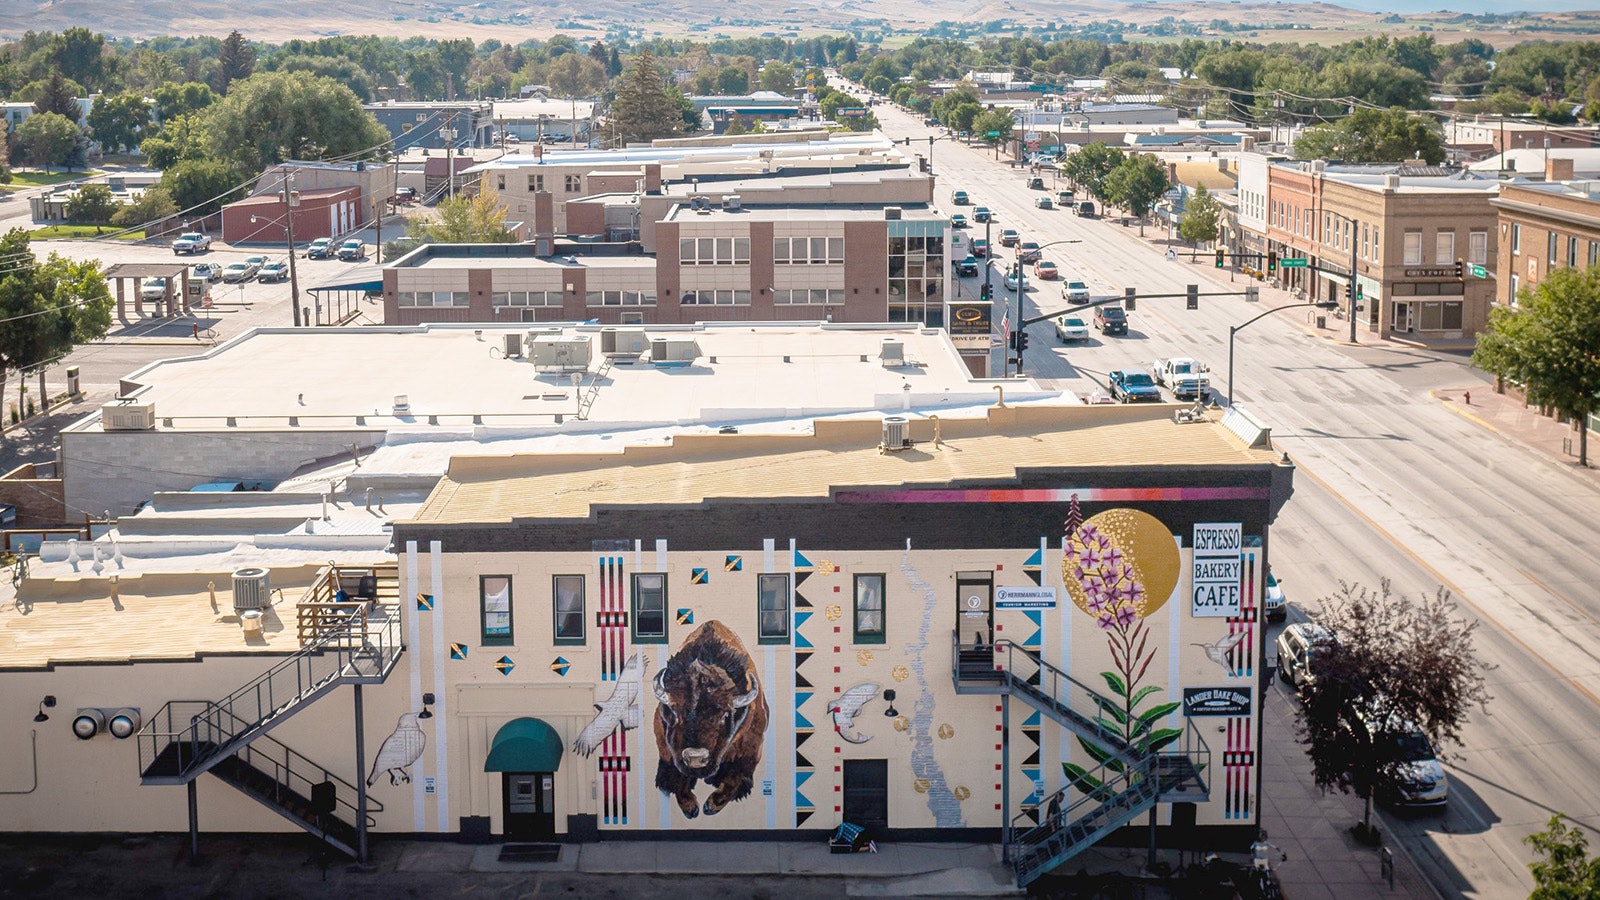 This mural titled "Power, Life, Healing" on the Bossert Building in downtown Lander is the result of a collaboration to bring art that honors Native Americans and Wyoming.